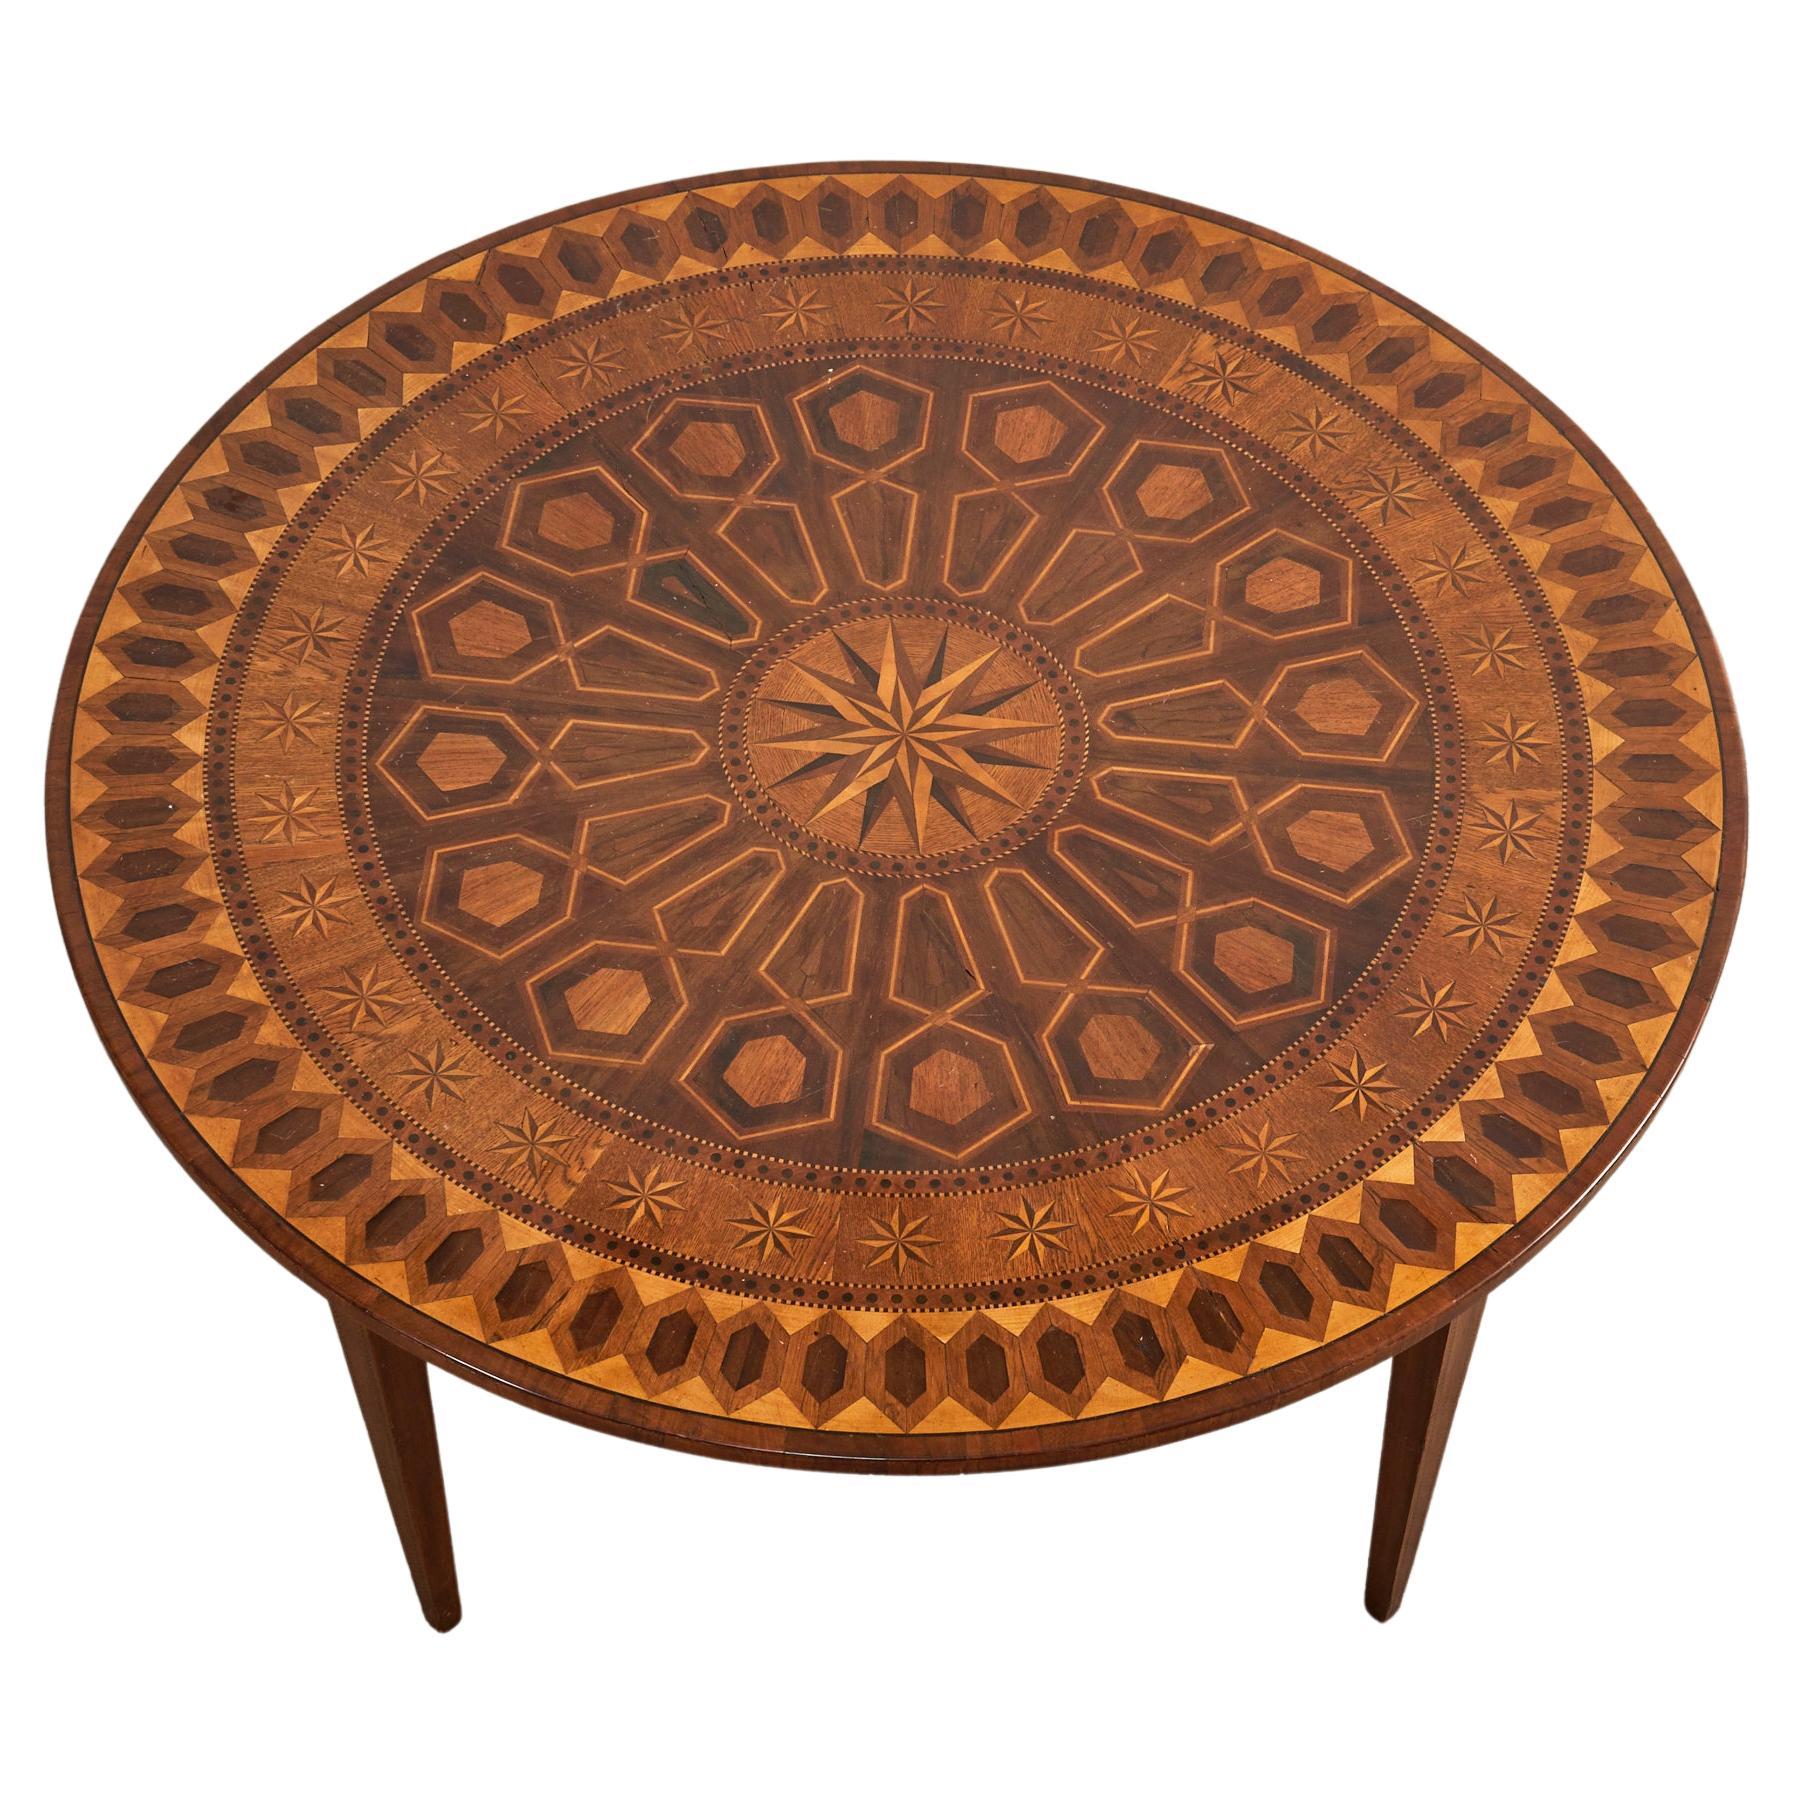 19th Century Italian Neoclassical Parquetry Walnut Dining Centre Table